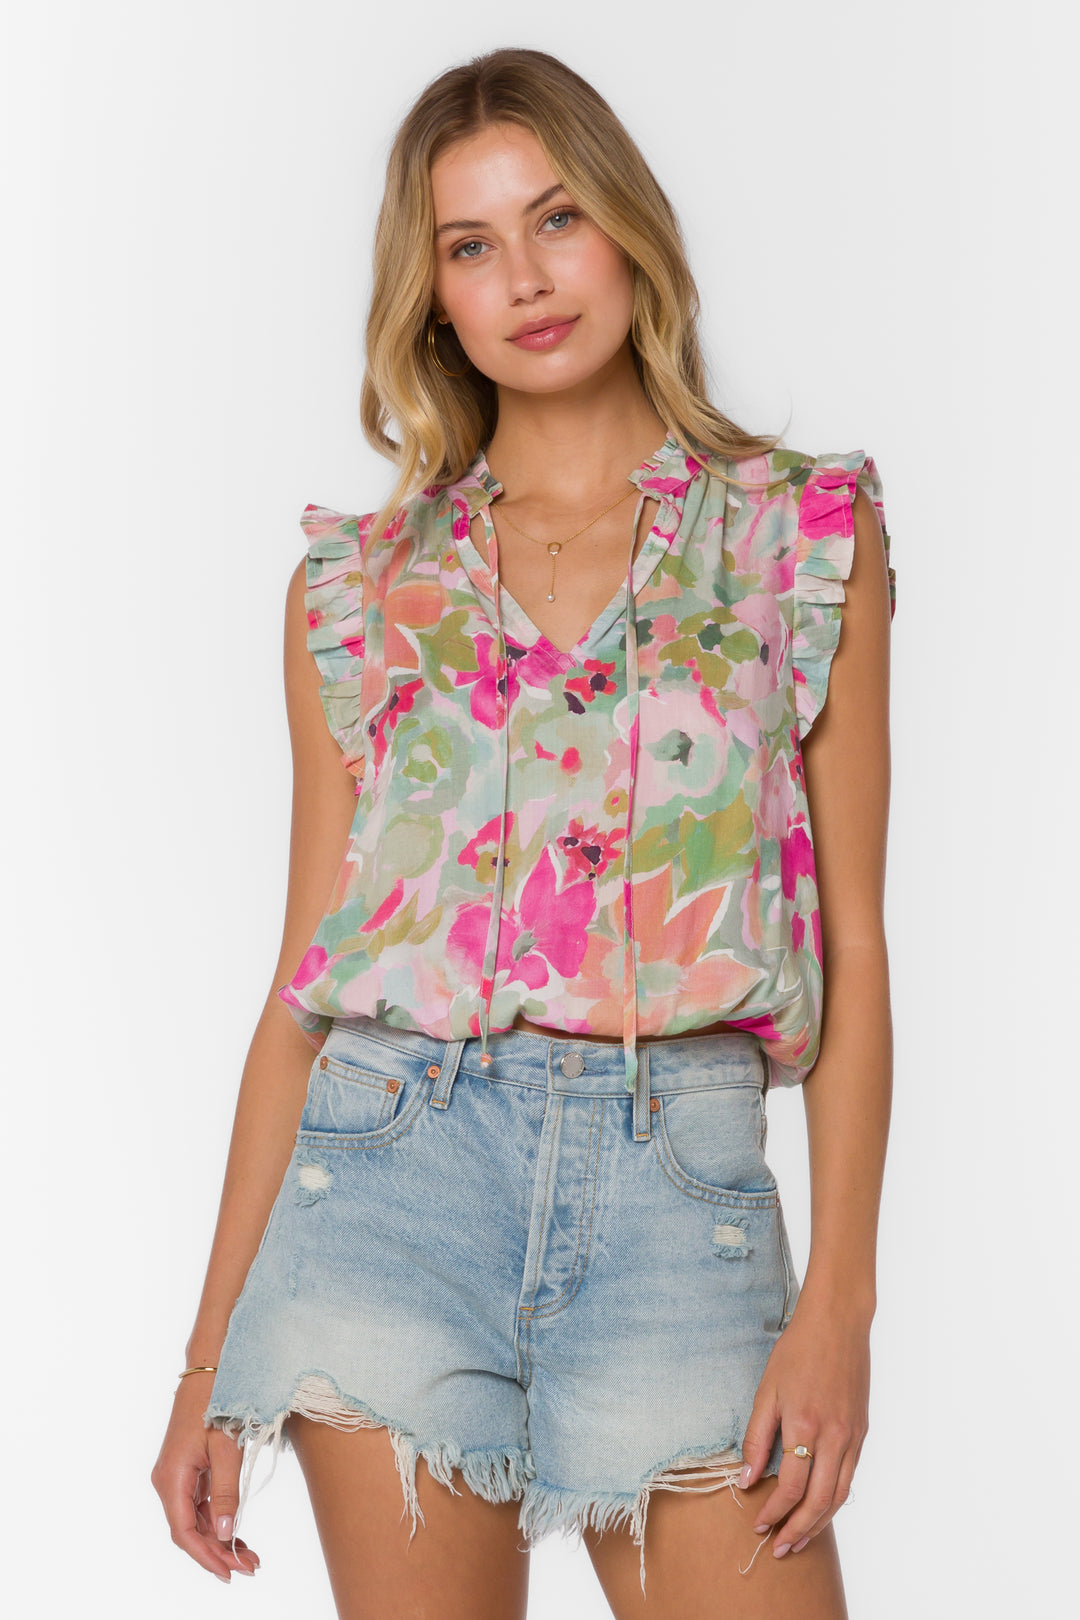 Colima Painted Floral Top - Tops - Velvet Heart Clothing